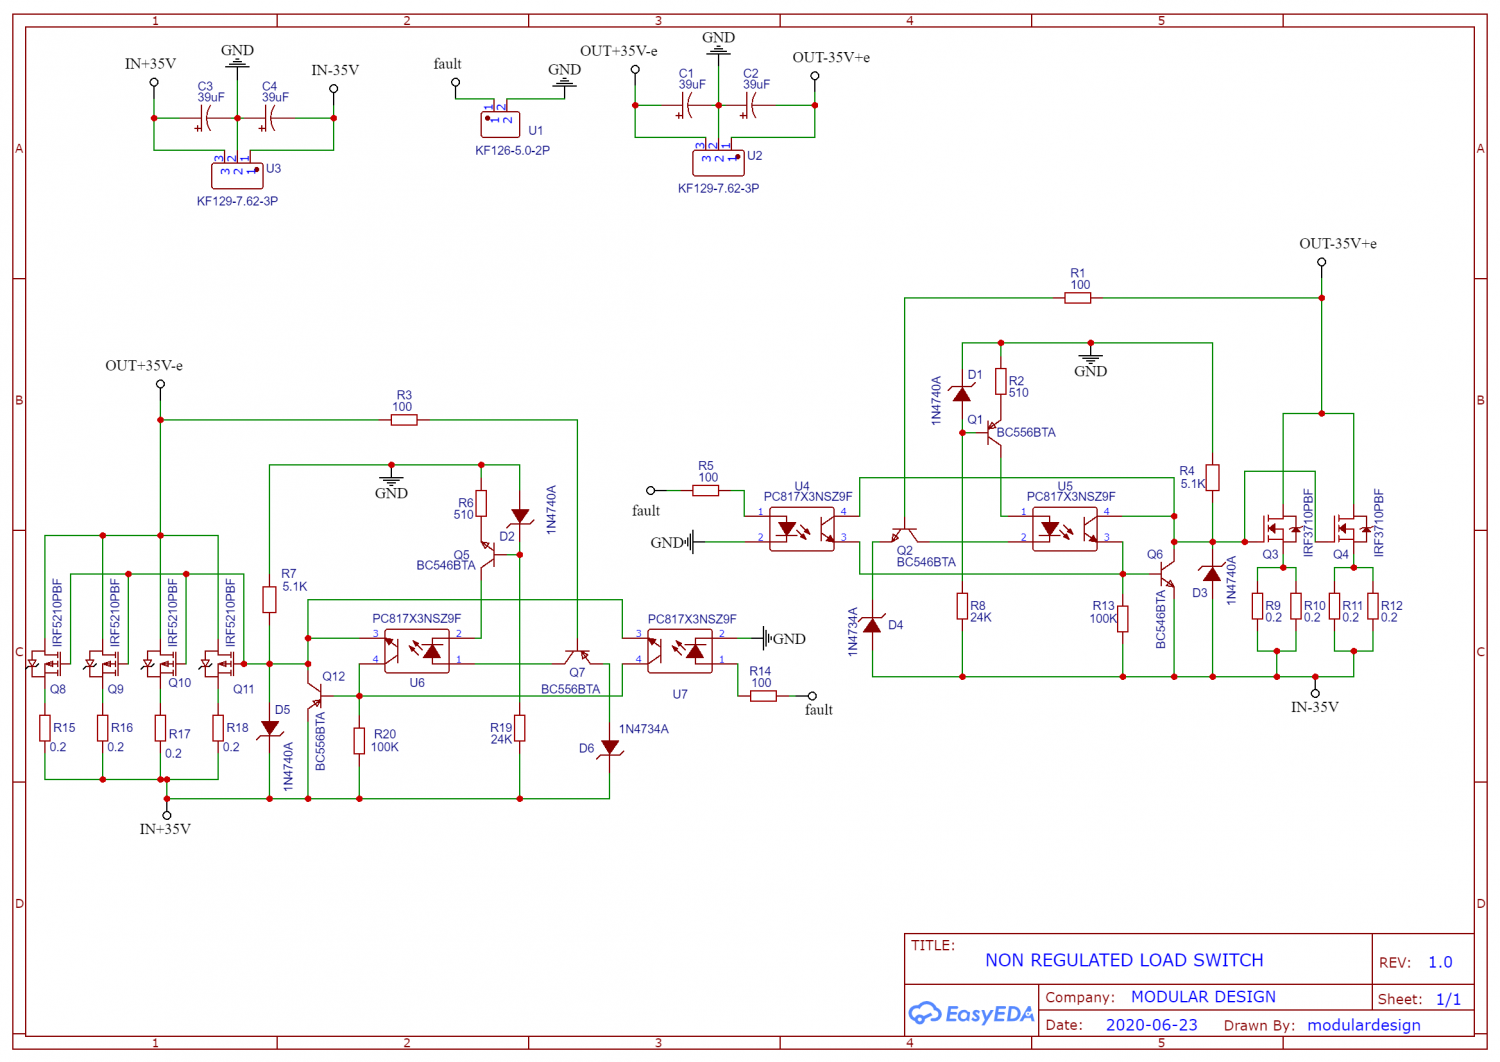 Schematic_LoadSwitchDisplay_2022-03-25.png